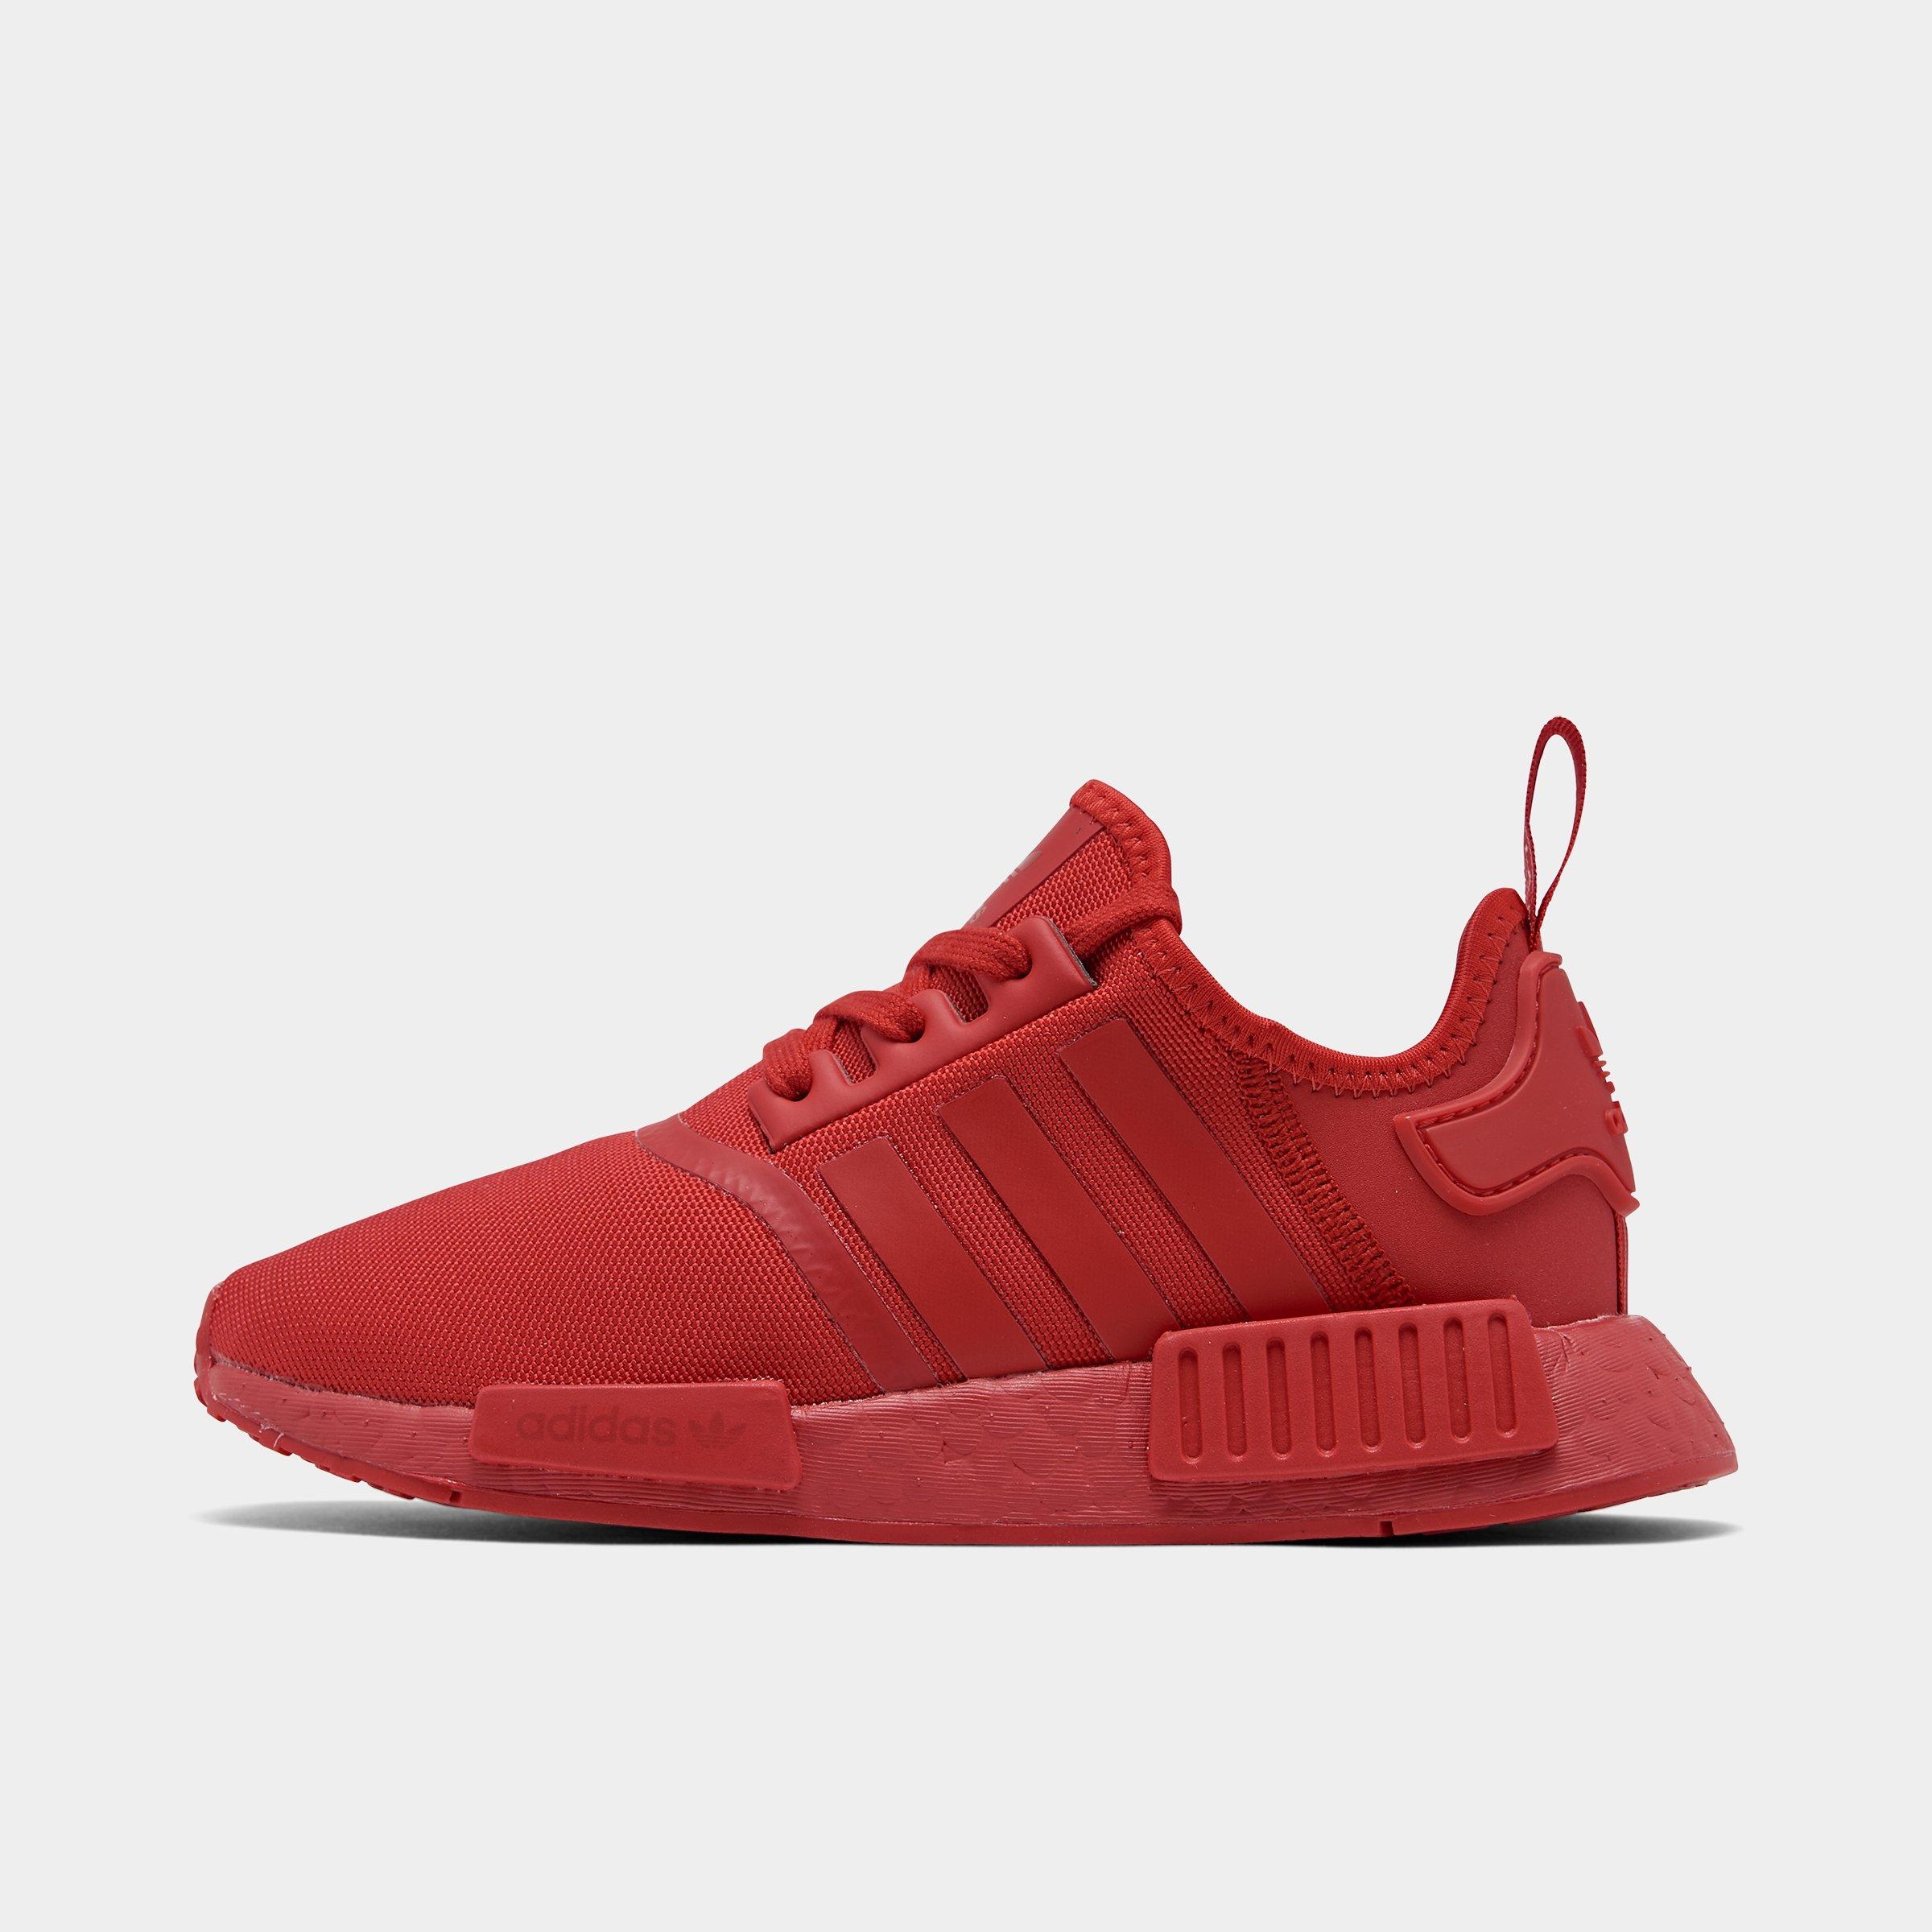 red adidas trainers kids